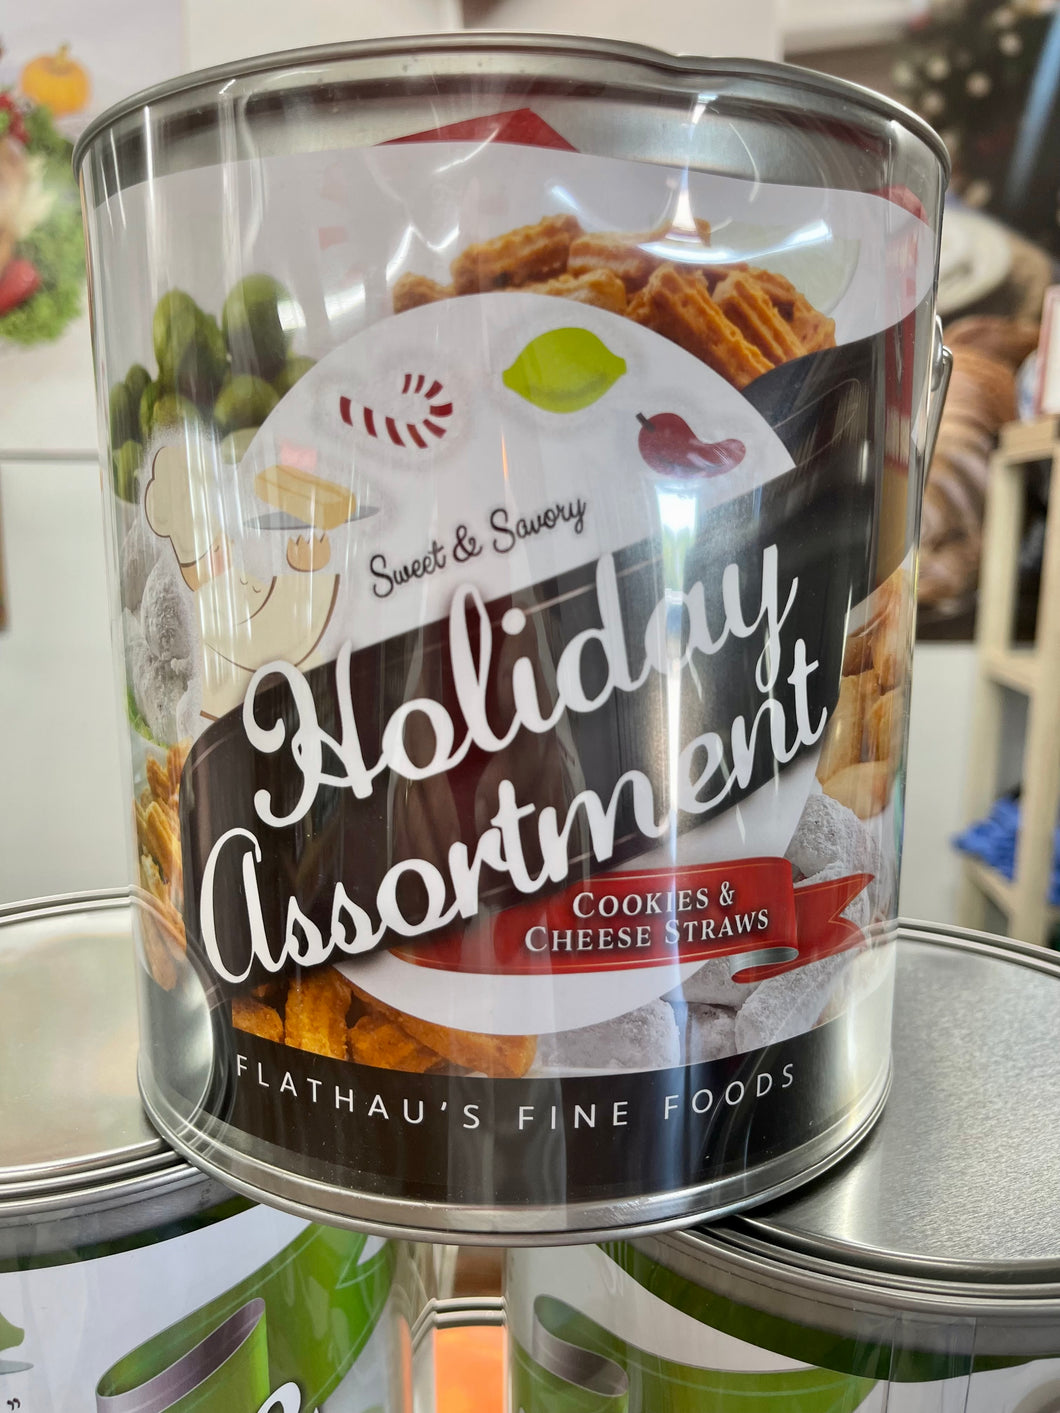 Holiday Assortment / 4 oz Pail of Cheese Straws & Shortbread Cookies